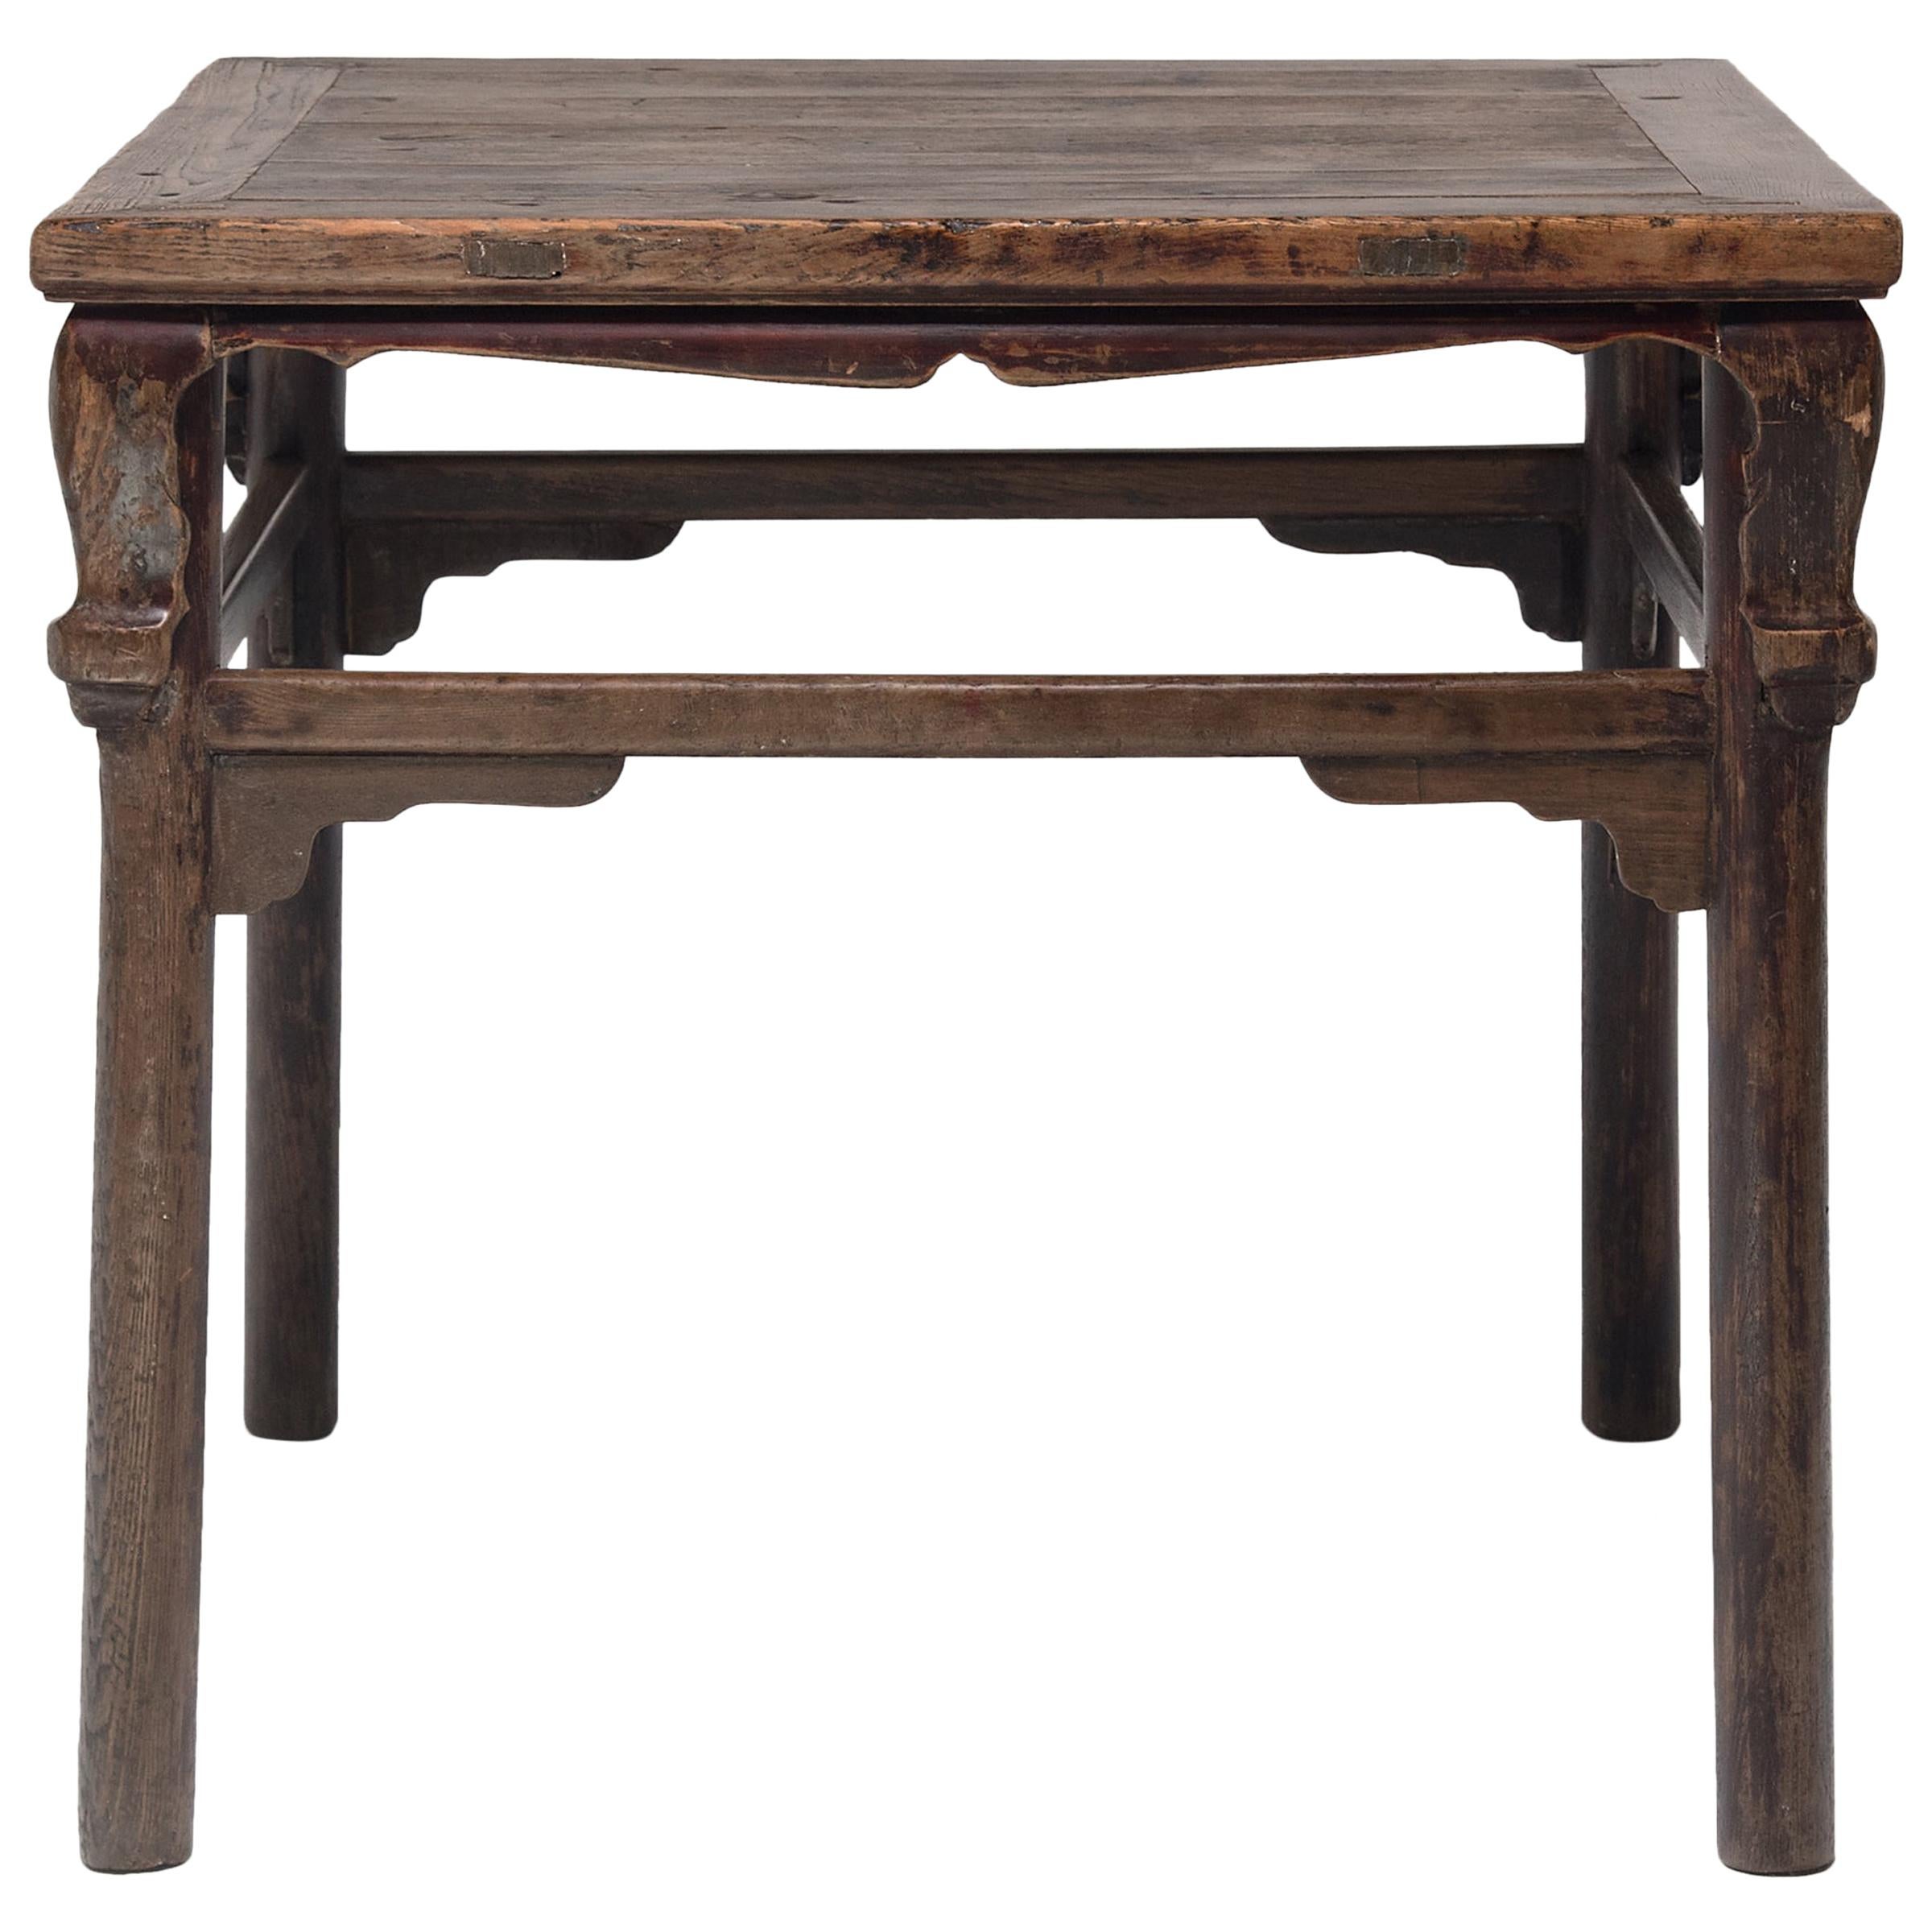 Chinese Square Display Table with Scroll Corners, circa 1850